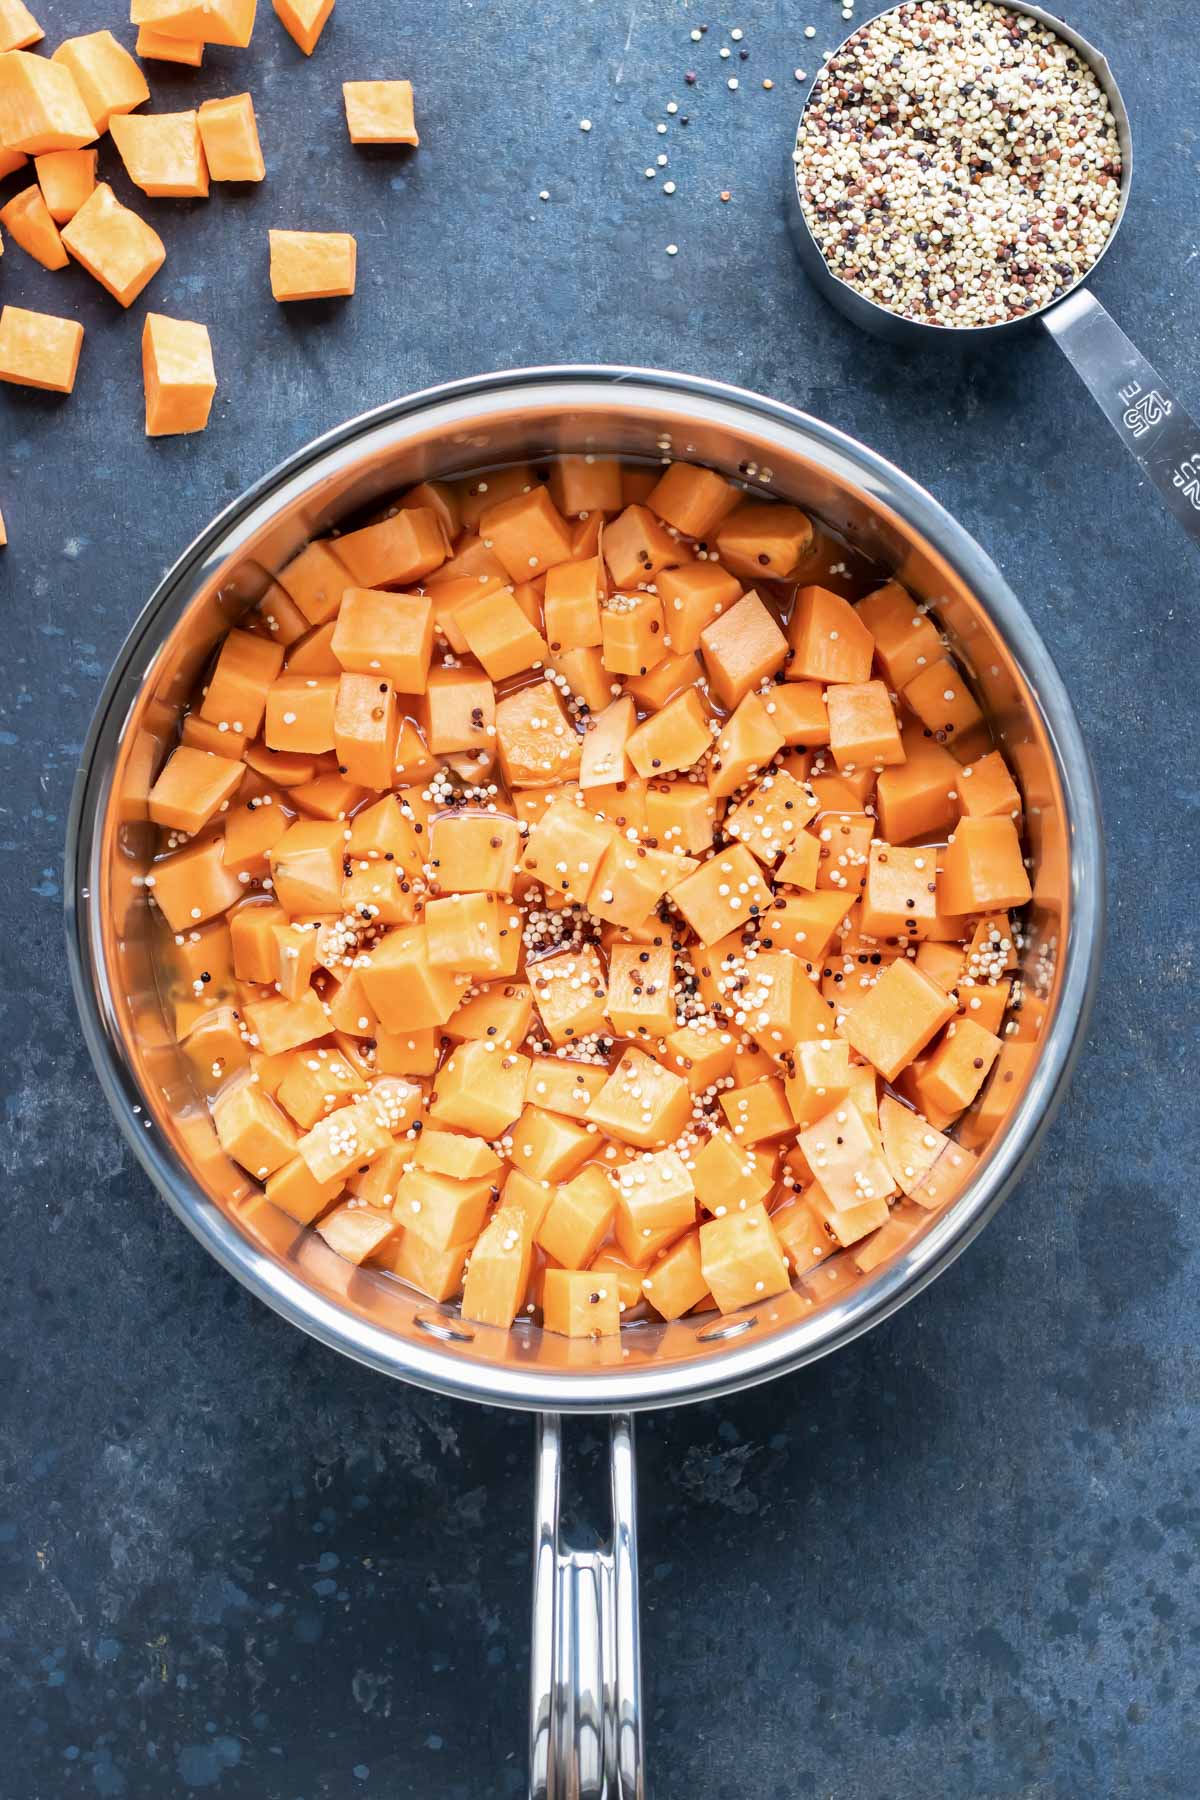 Sweet potatoes that have been cooked with quinoa.